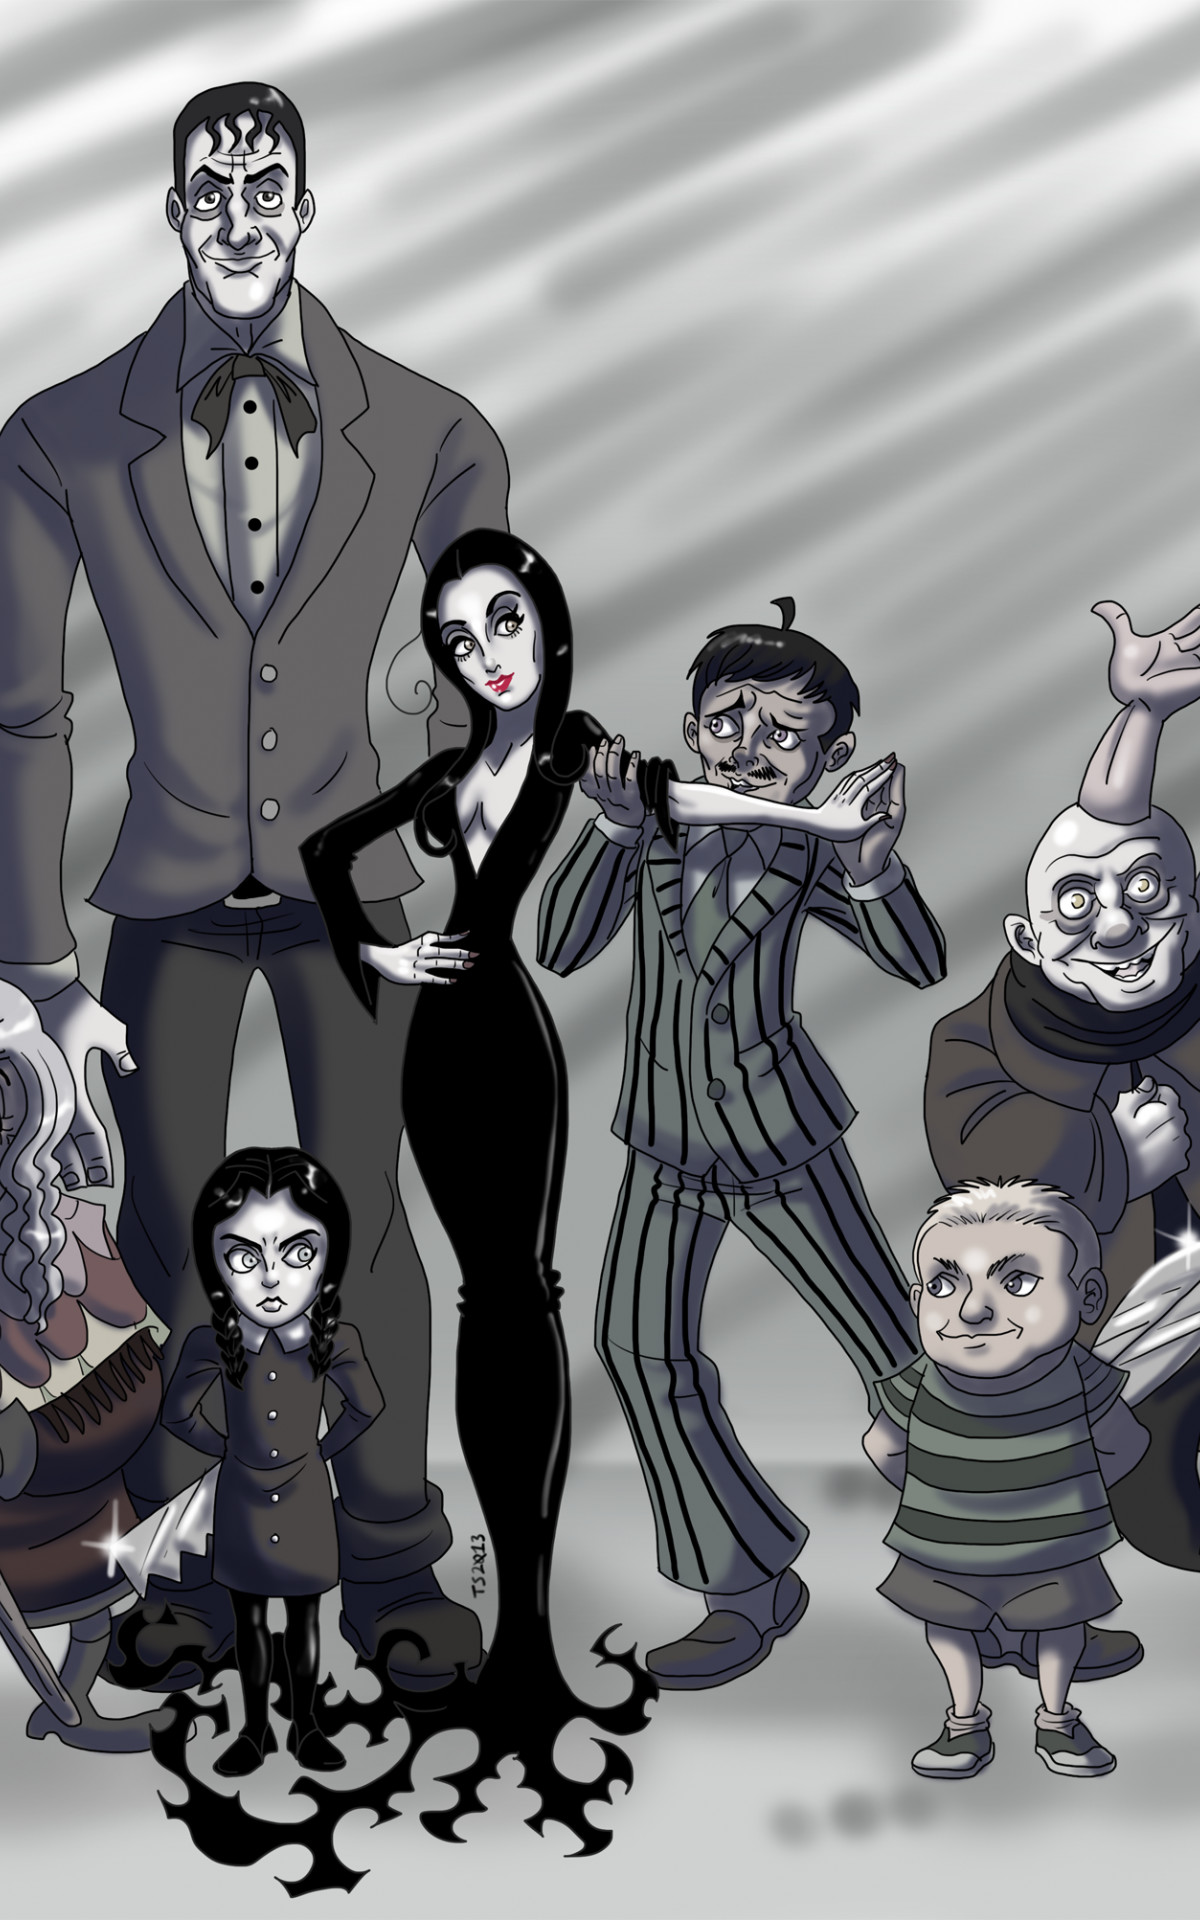 Wednesday Addams Wallpaper - Addams Family Cartoon Black And White , HD Wallpaper & Backgrounds